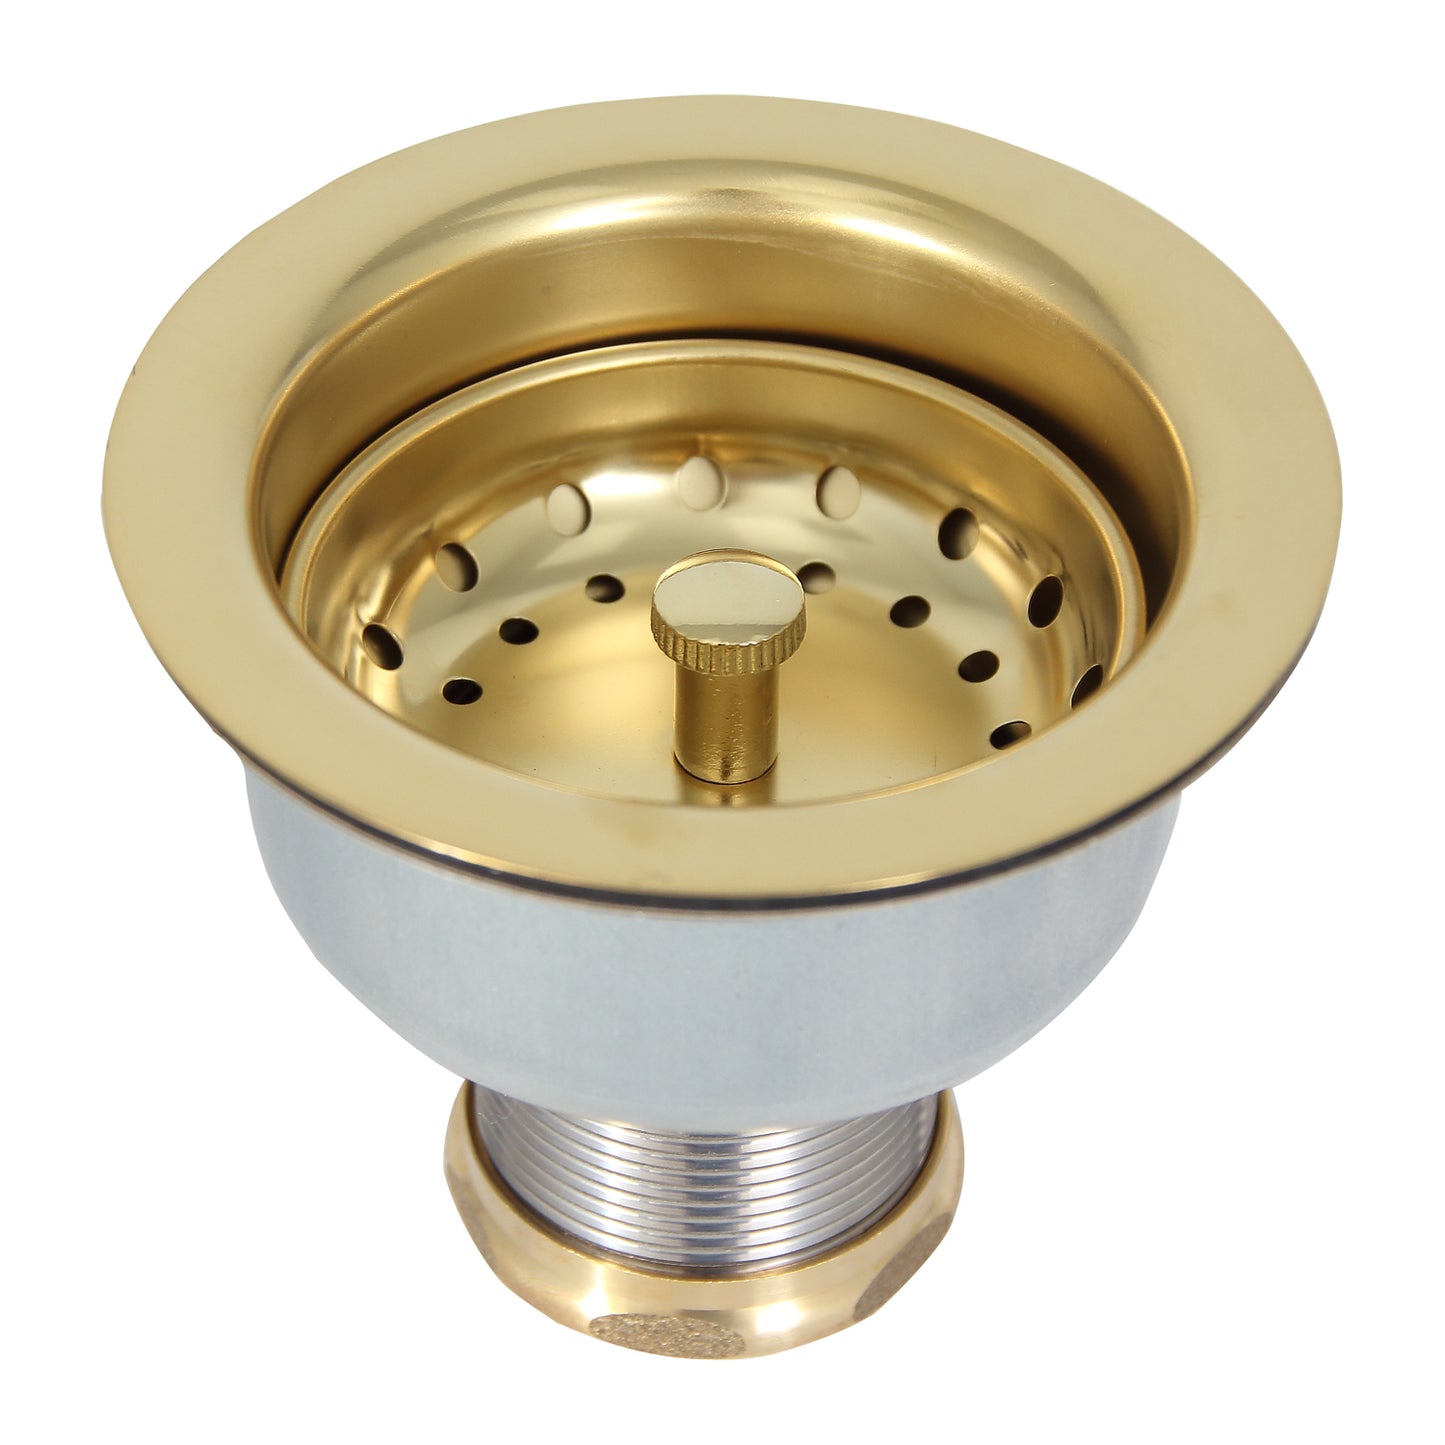 Kitchen Sink Strainer for 3-1/2" Drain with 3-1/2" Shank Polished Brass